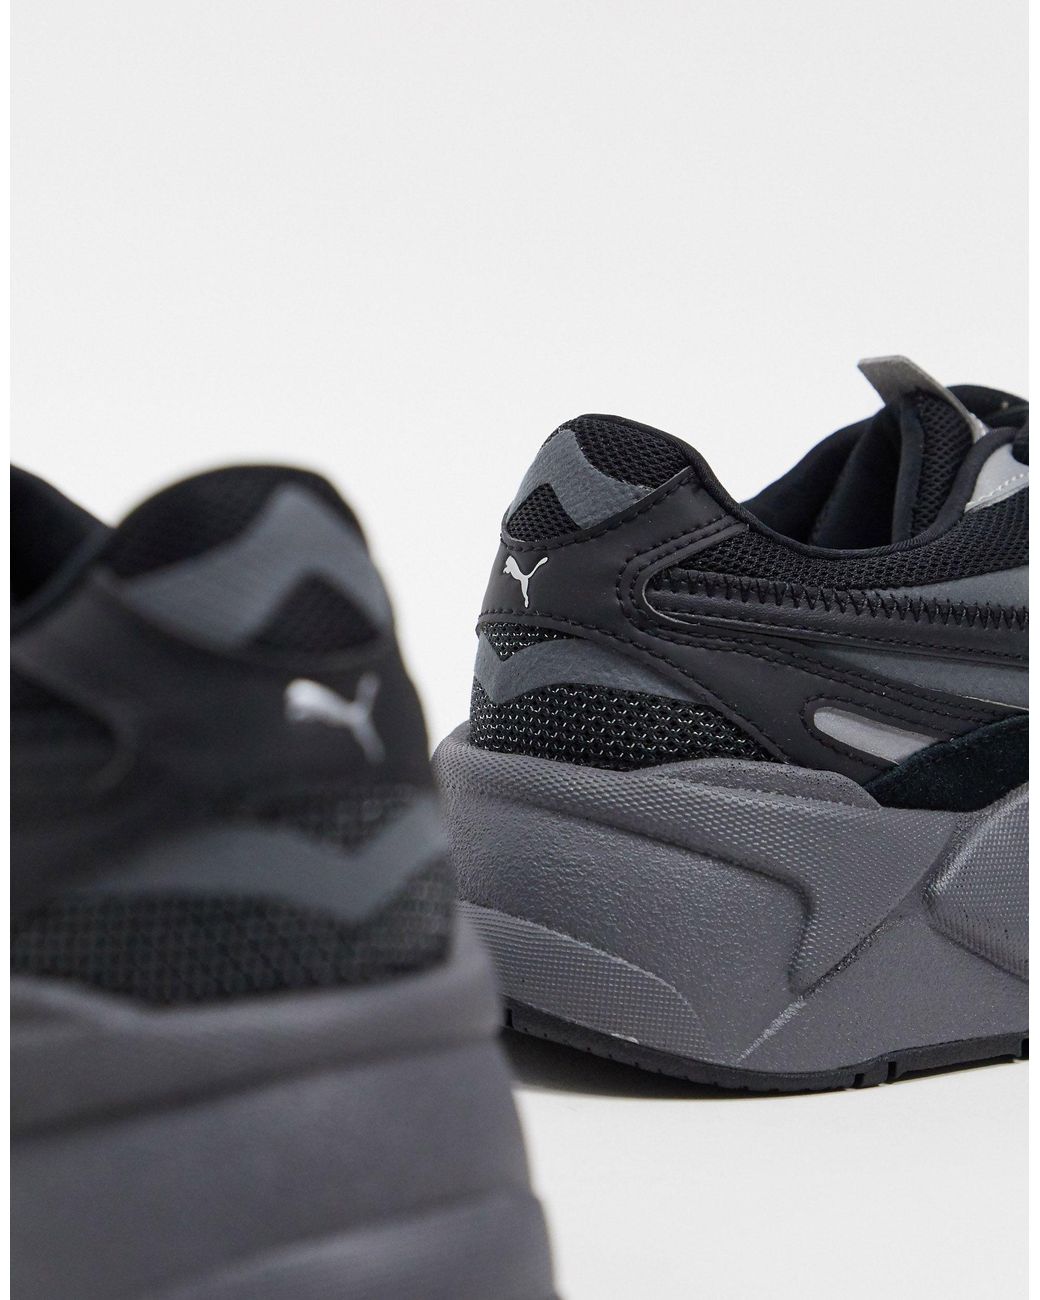 PUMA Puzzle Ck in Black for Lyst